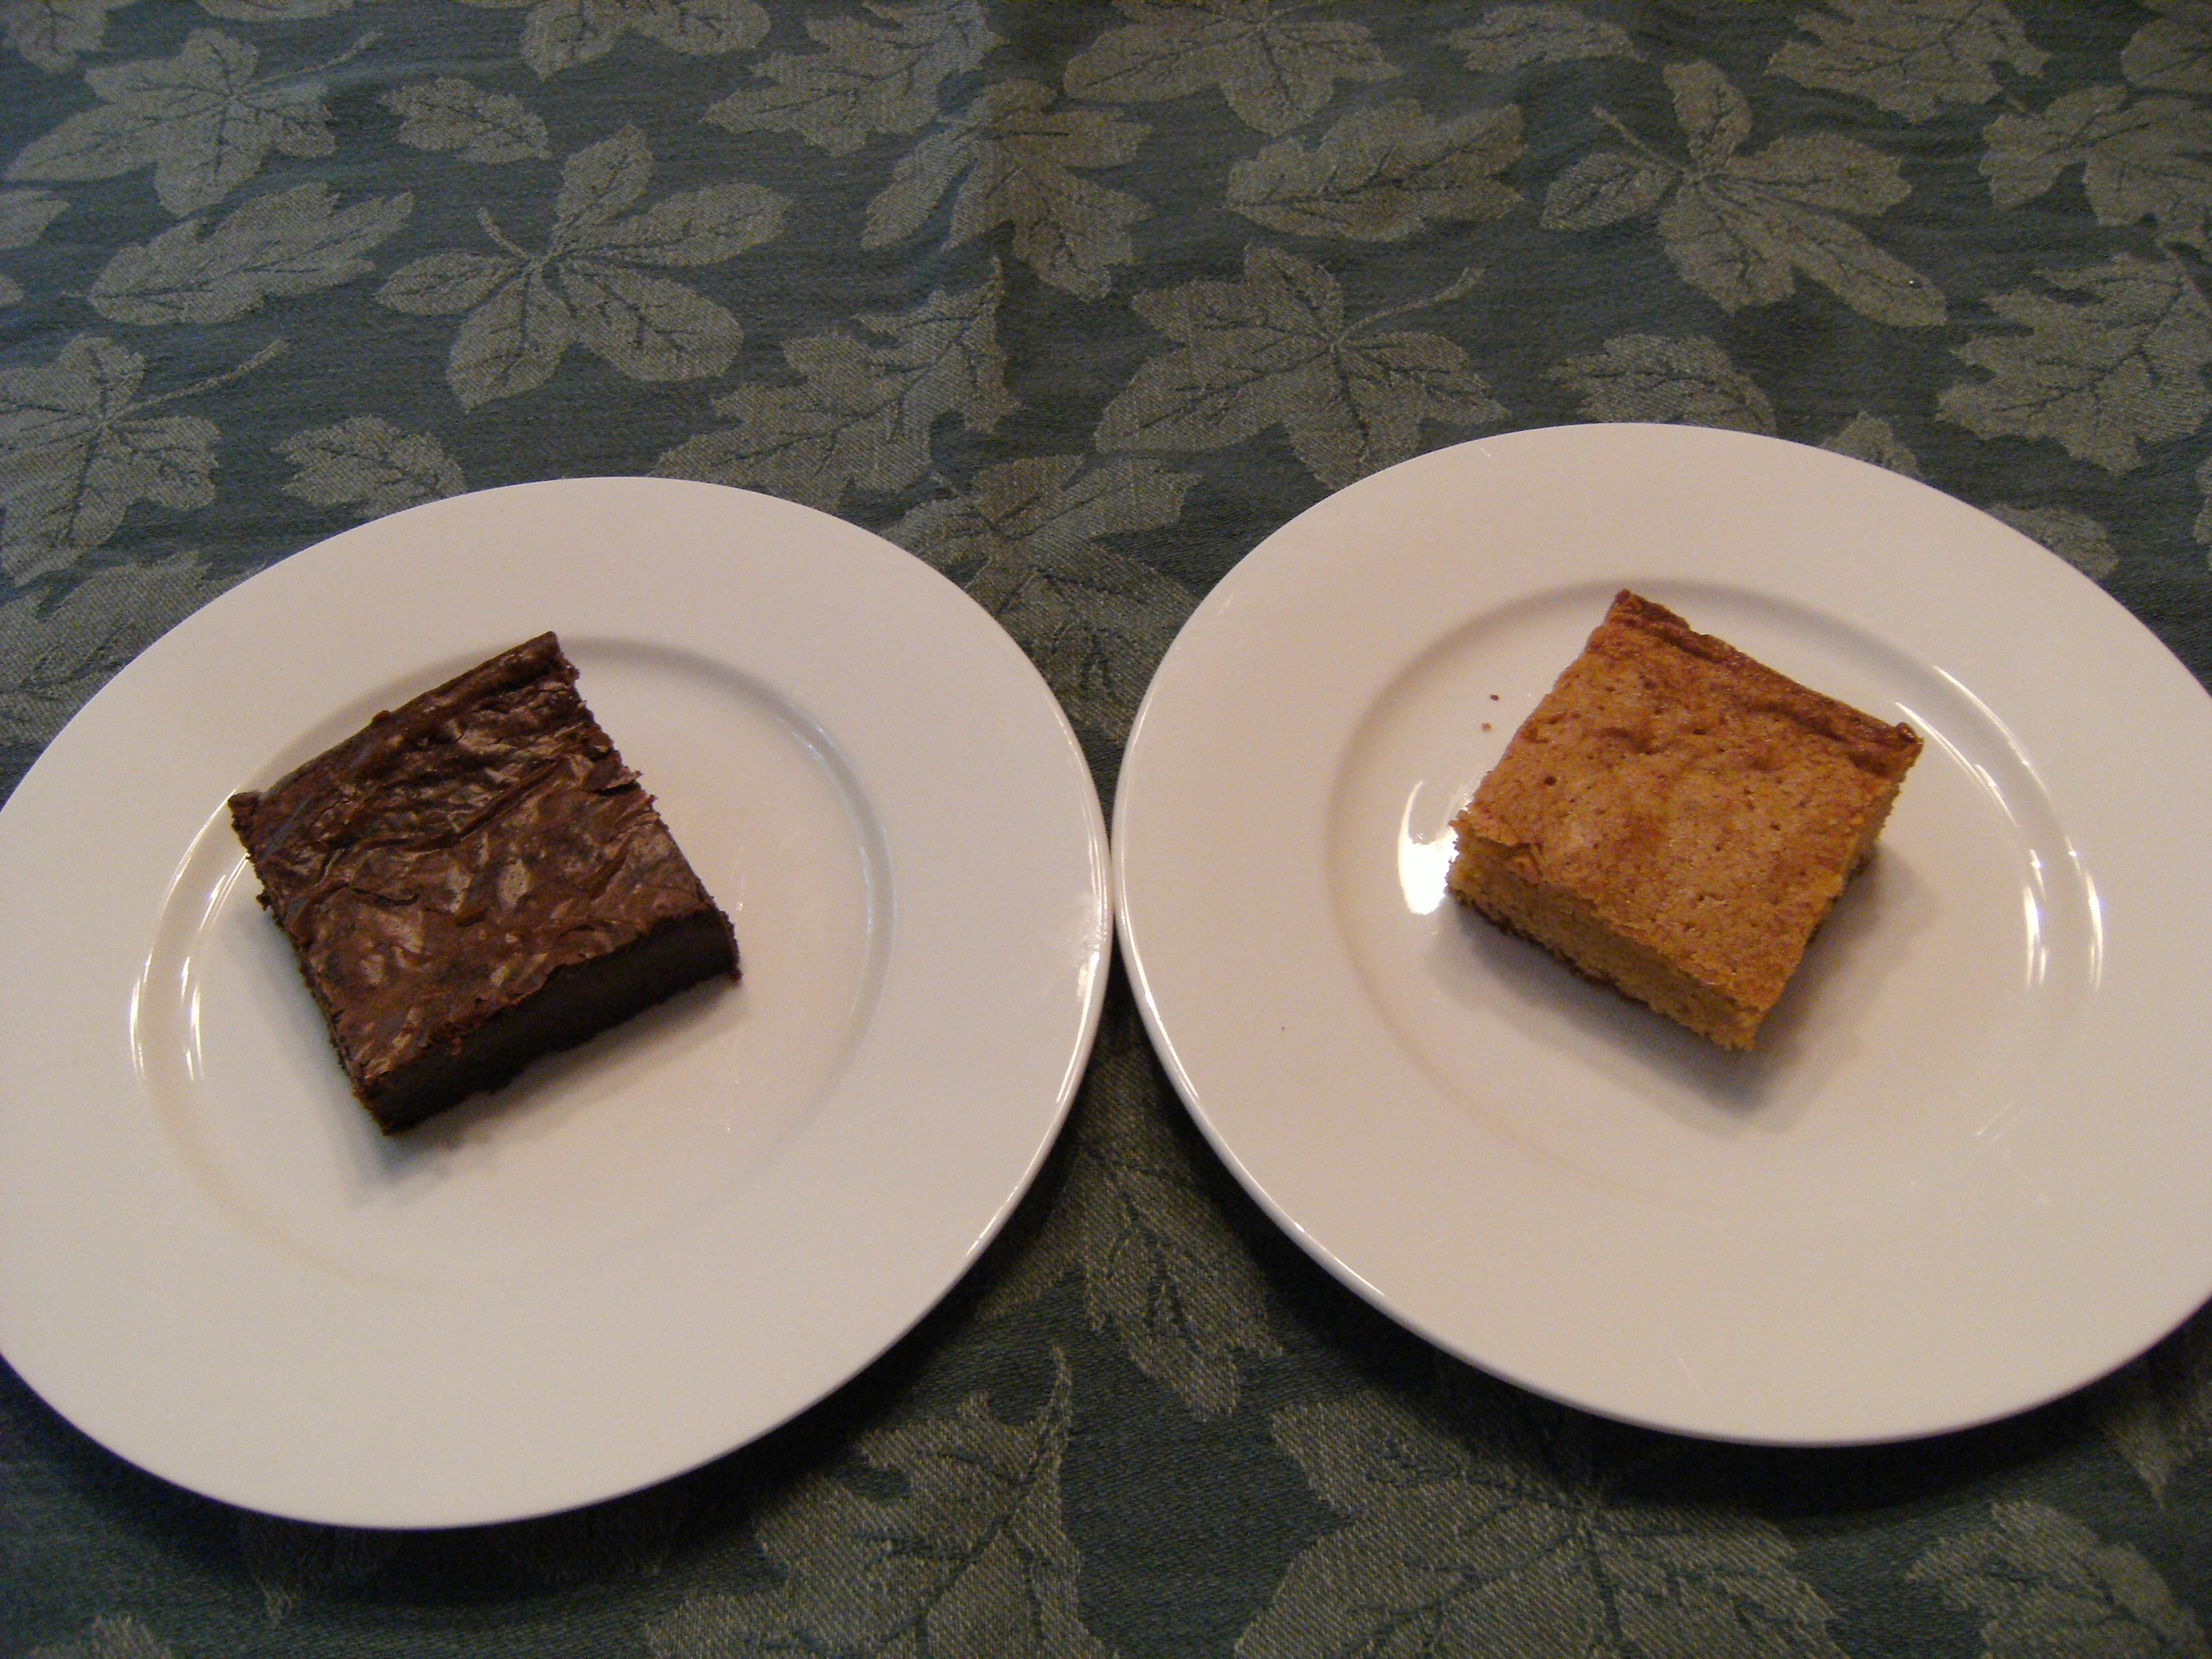 Blondies vs. Brownies - See which dessert won our taste test throw down and get recipes for both of them on ComfortablyDomestic.com